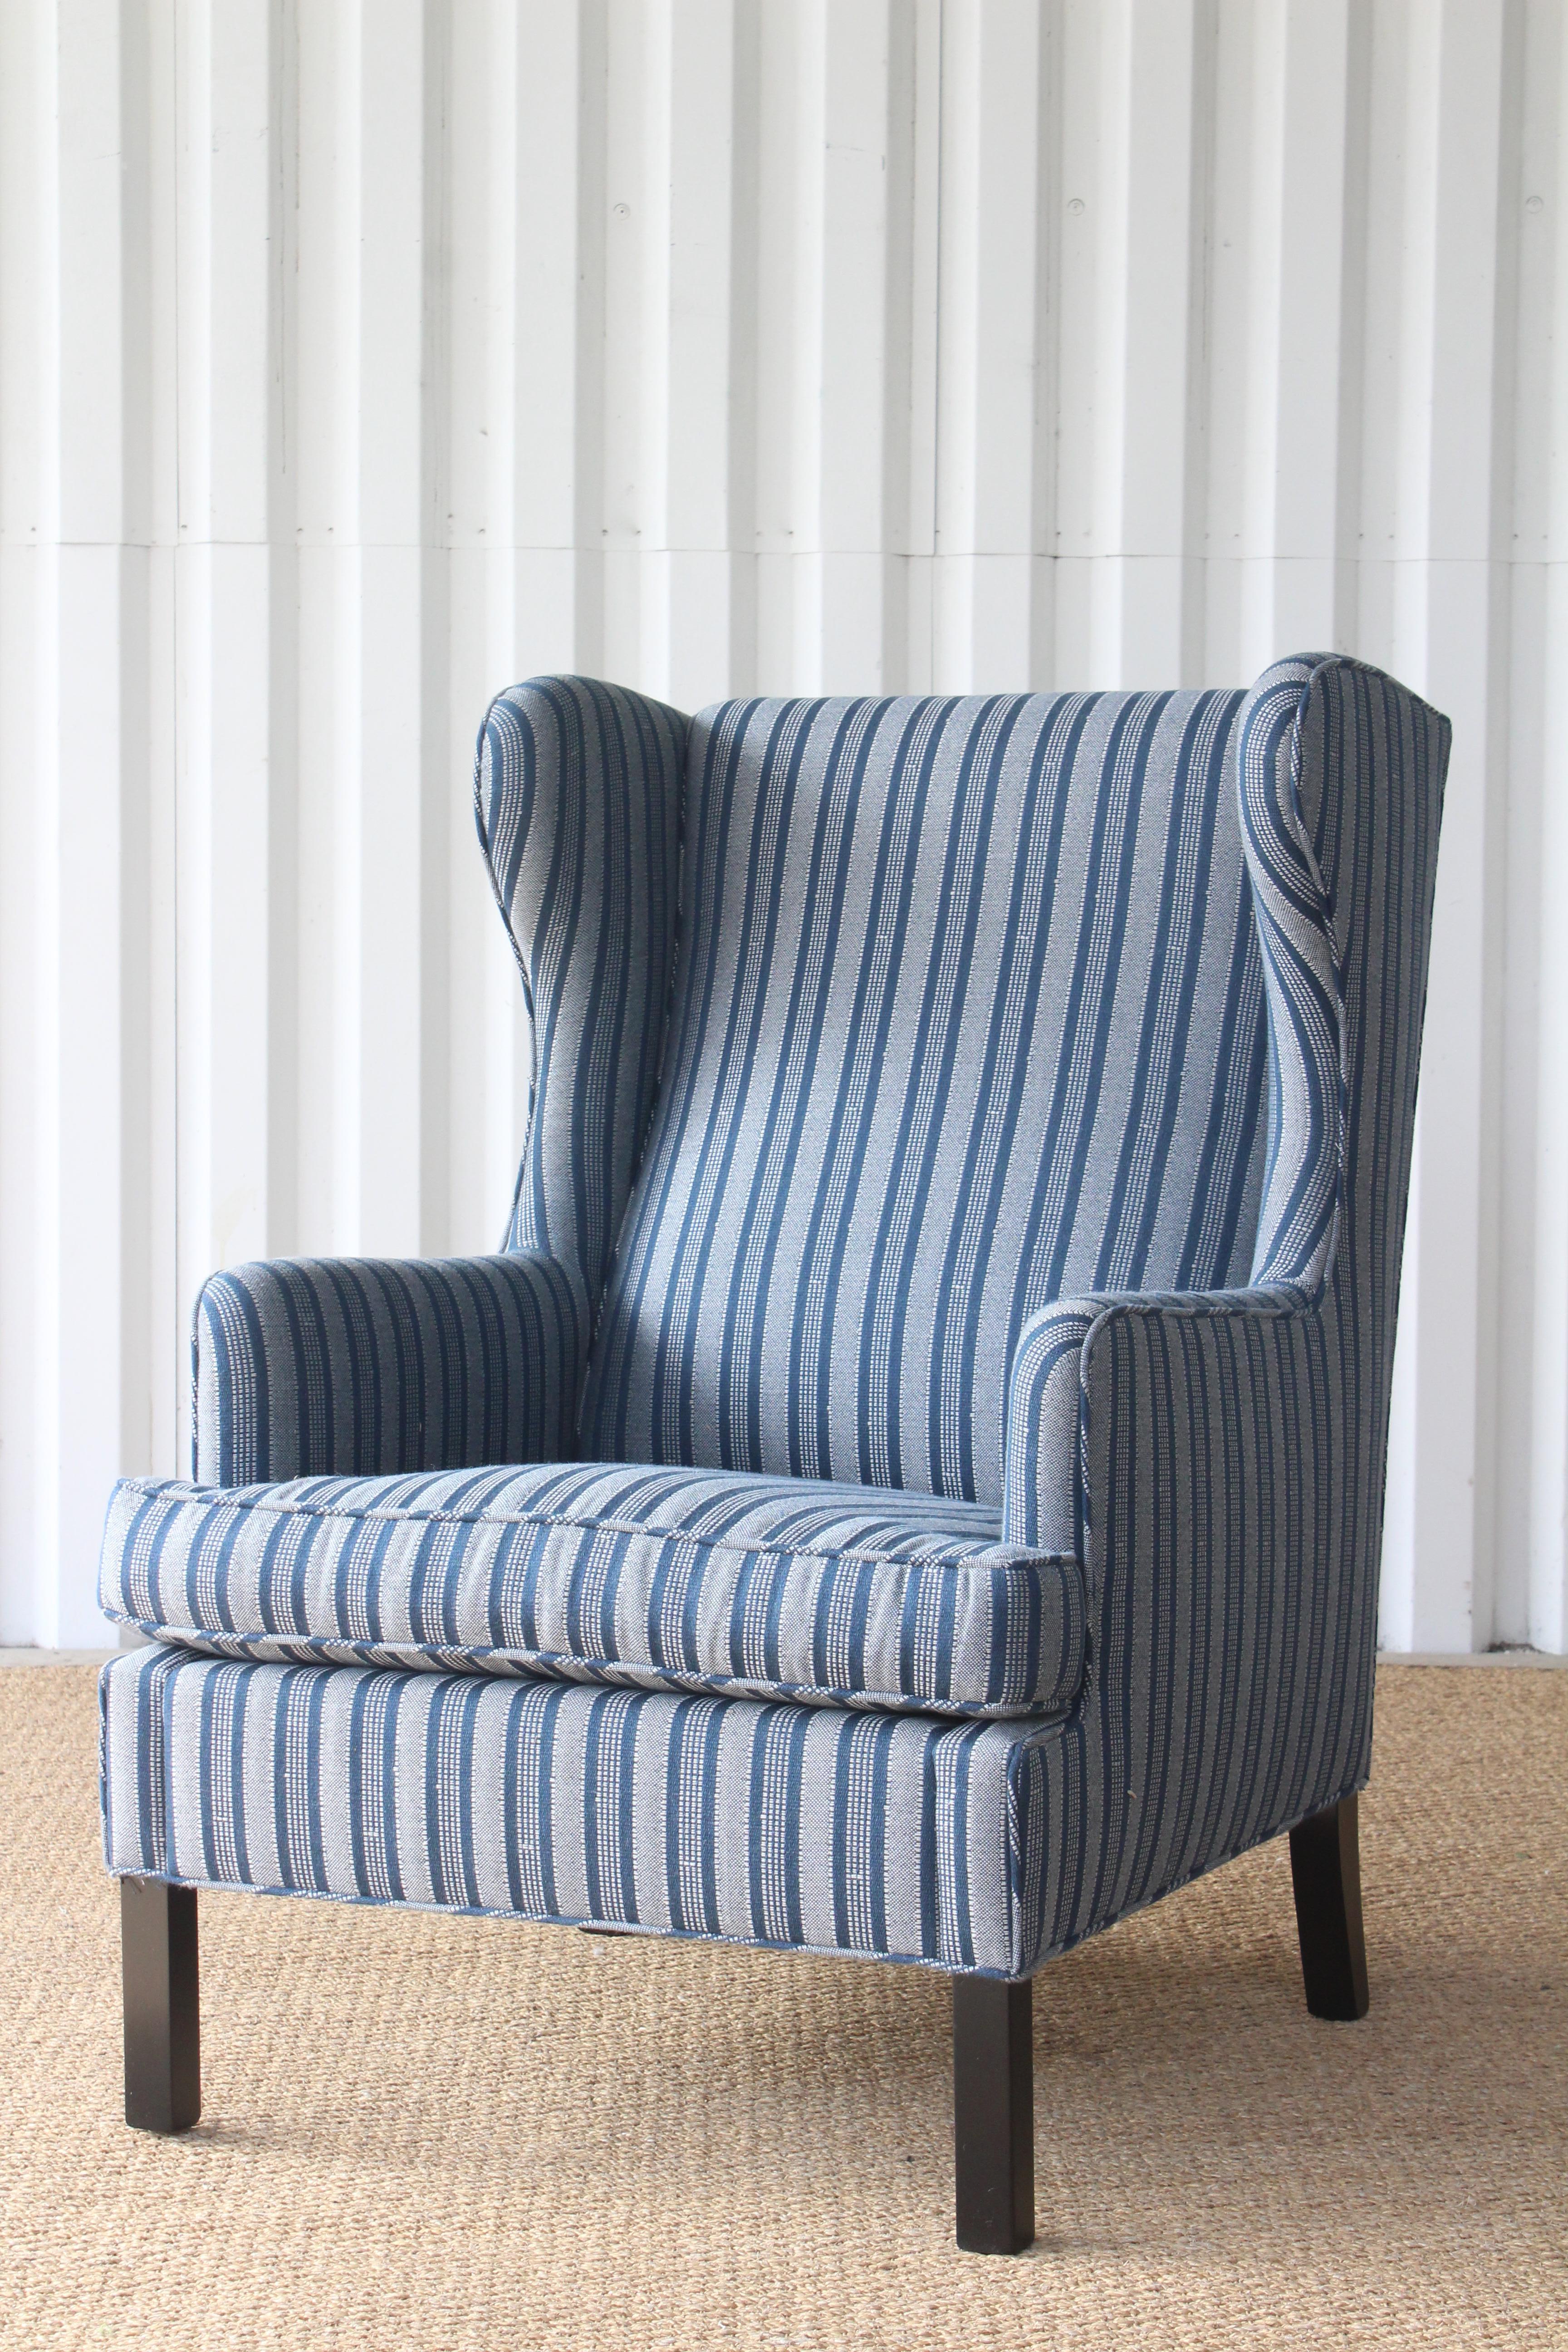 Vintage 1950s Danish high back wing chair. Restored with new upholstery in Peter Dunham Textiles 'Amida'- made from 100% Sunbrella yarns. The fabric is a performance woven and is fade-resistant and easy to clean for worry-free living. The legs have